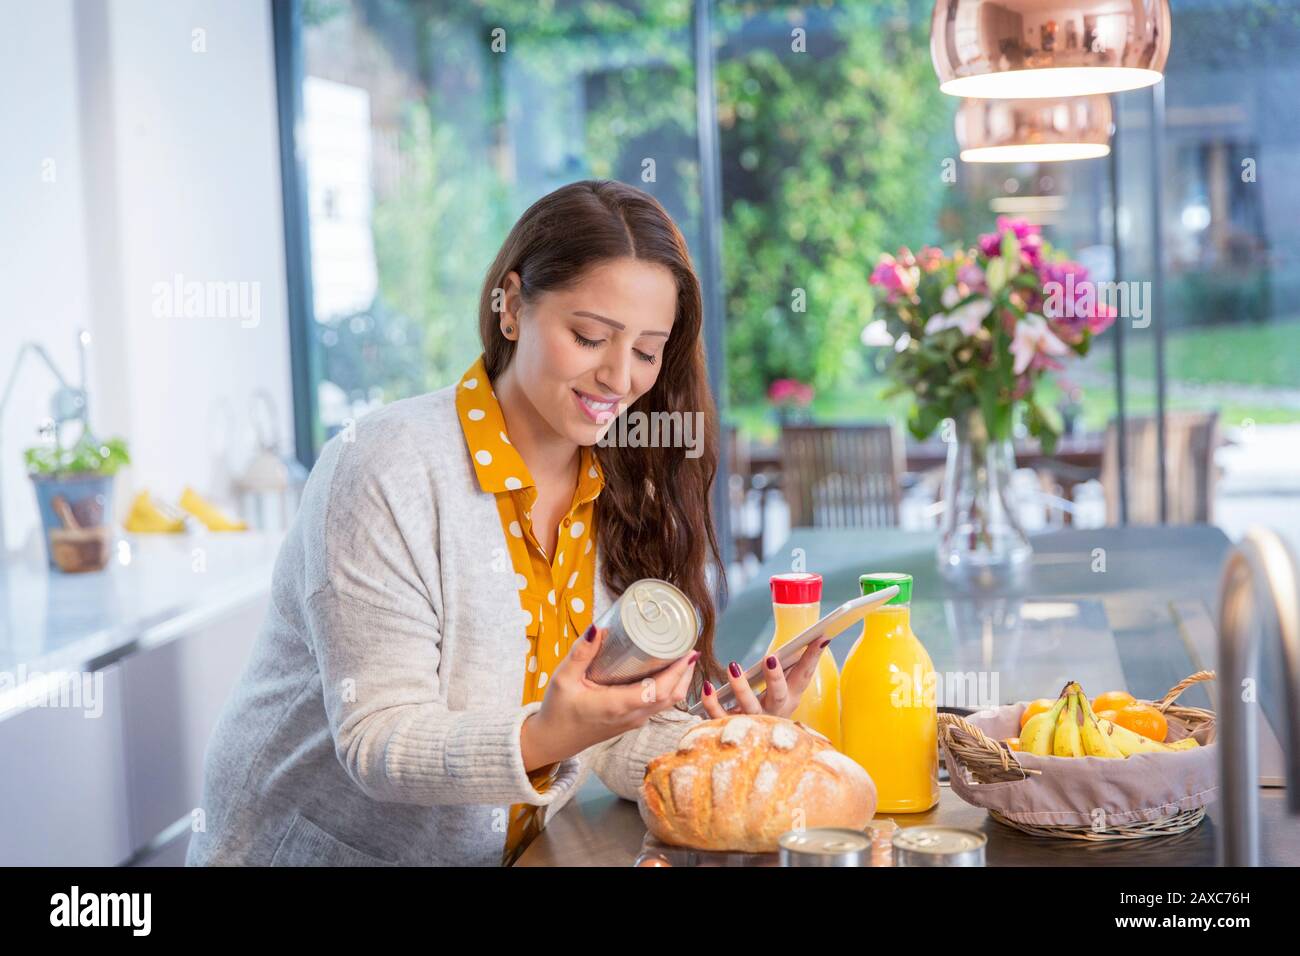 Smiling woman with digital tablet baking in kitchen Stock Photo